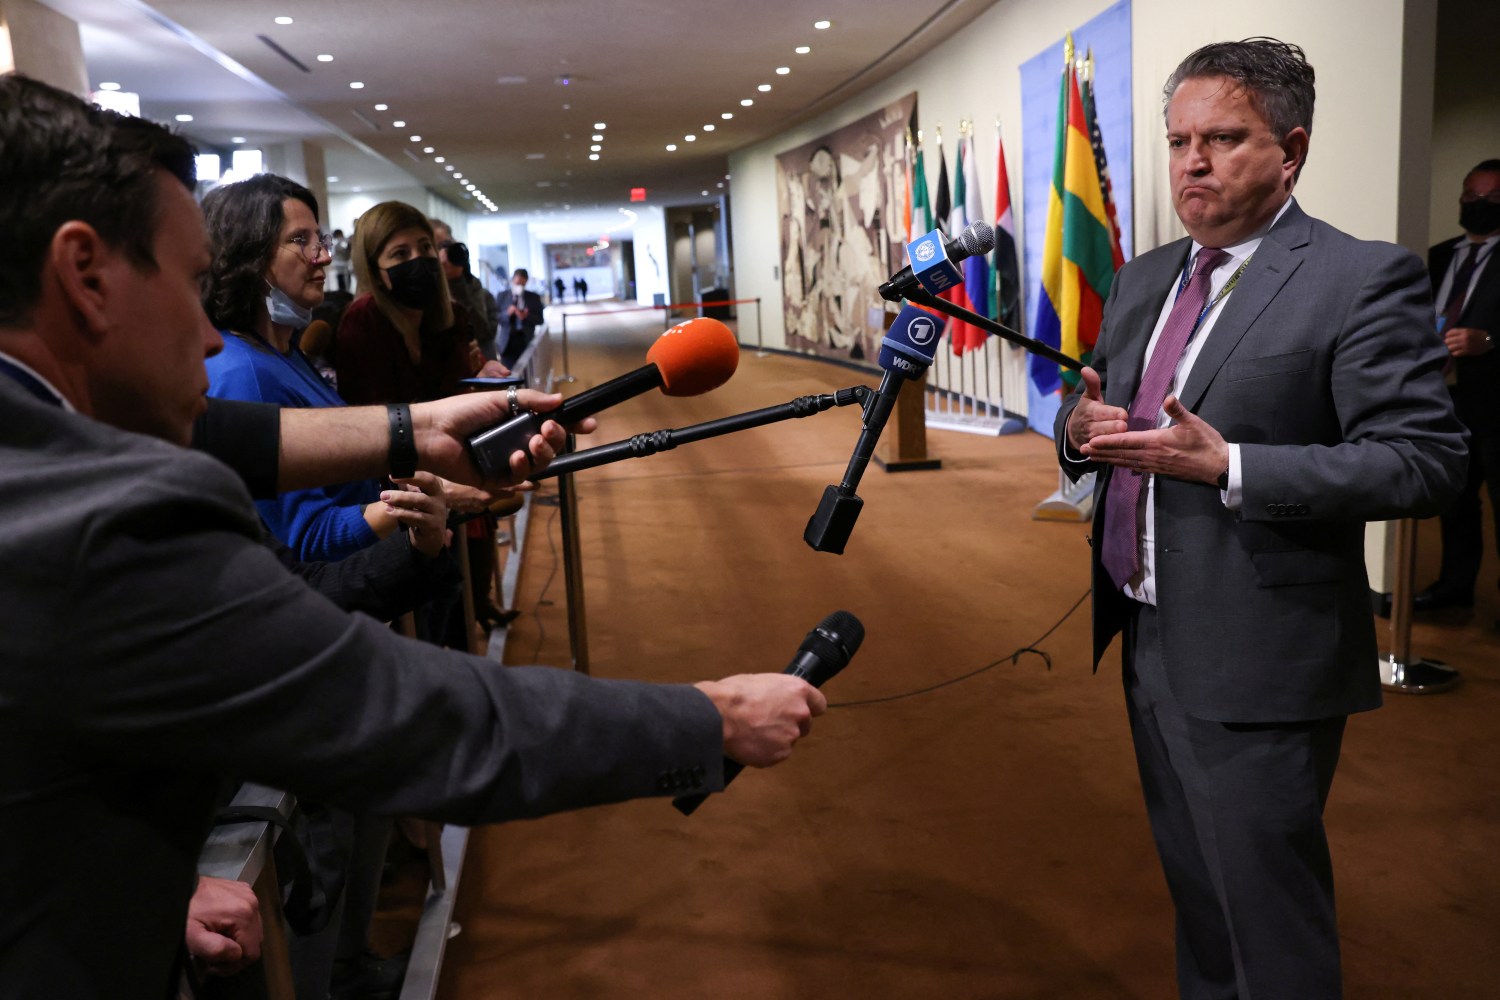 Ukrainian Ambassador to the United Nations Sergiy Kyslytsya speaks to the media following a United Nations Security Council meeting, amid Russia's invasion of Ukraine, at the United Nations Headquarters in Manhattan, New York City, New York, U.S., April 5, 2022. REUTERS/Andrew Kelly